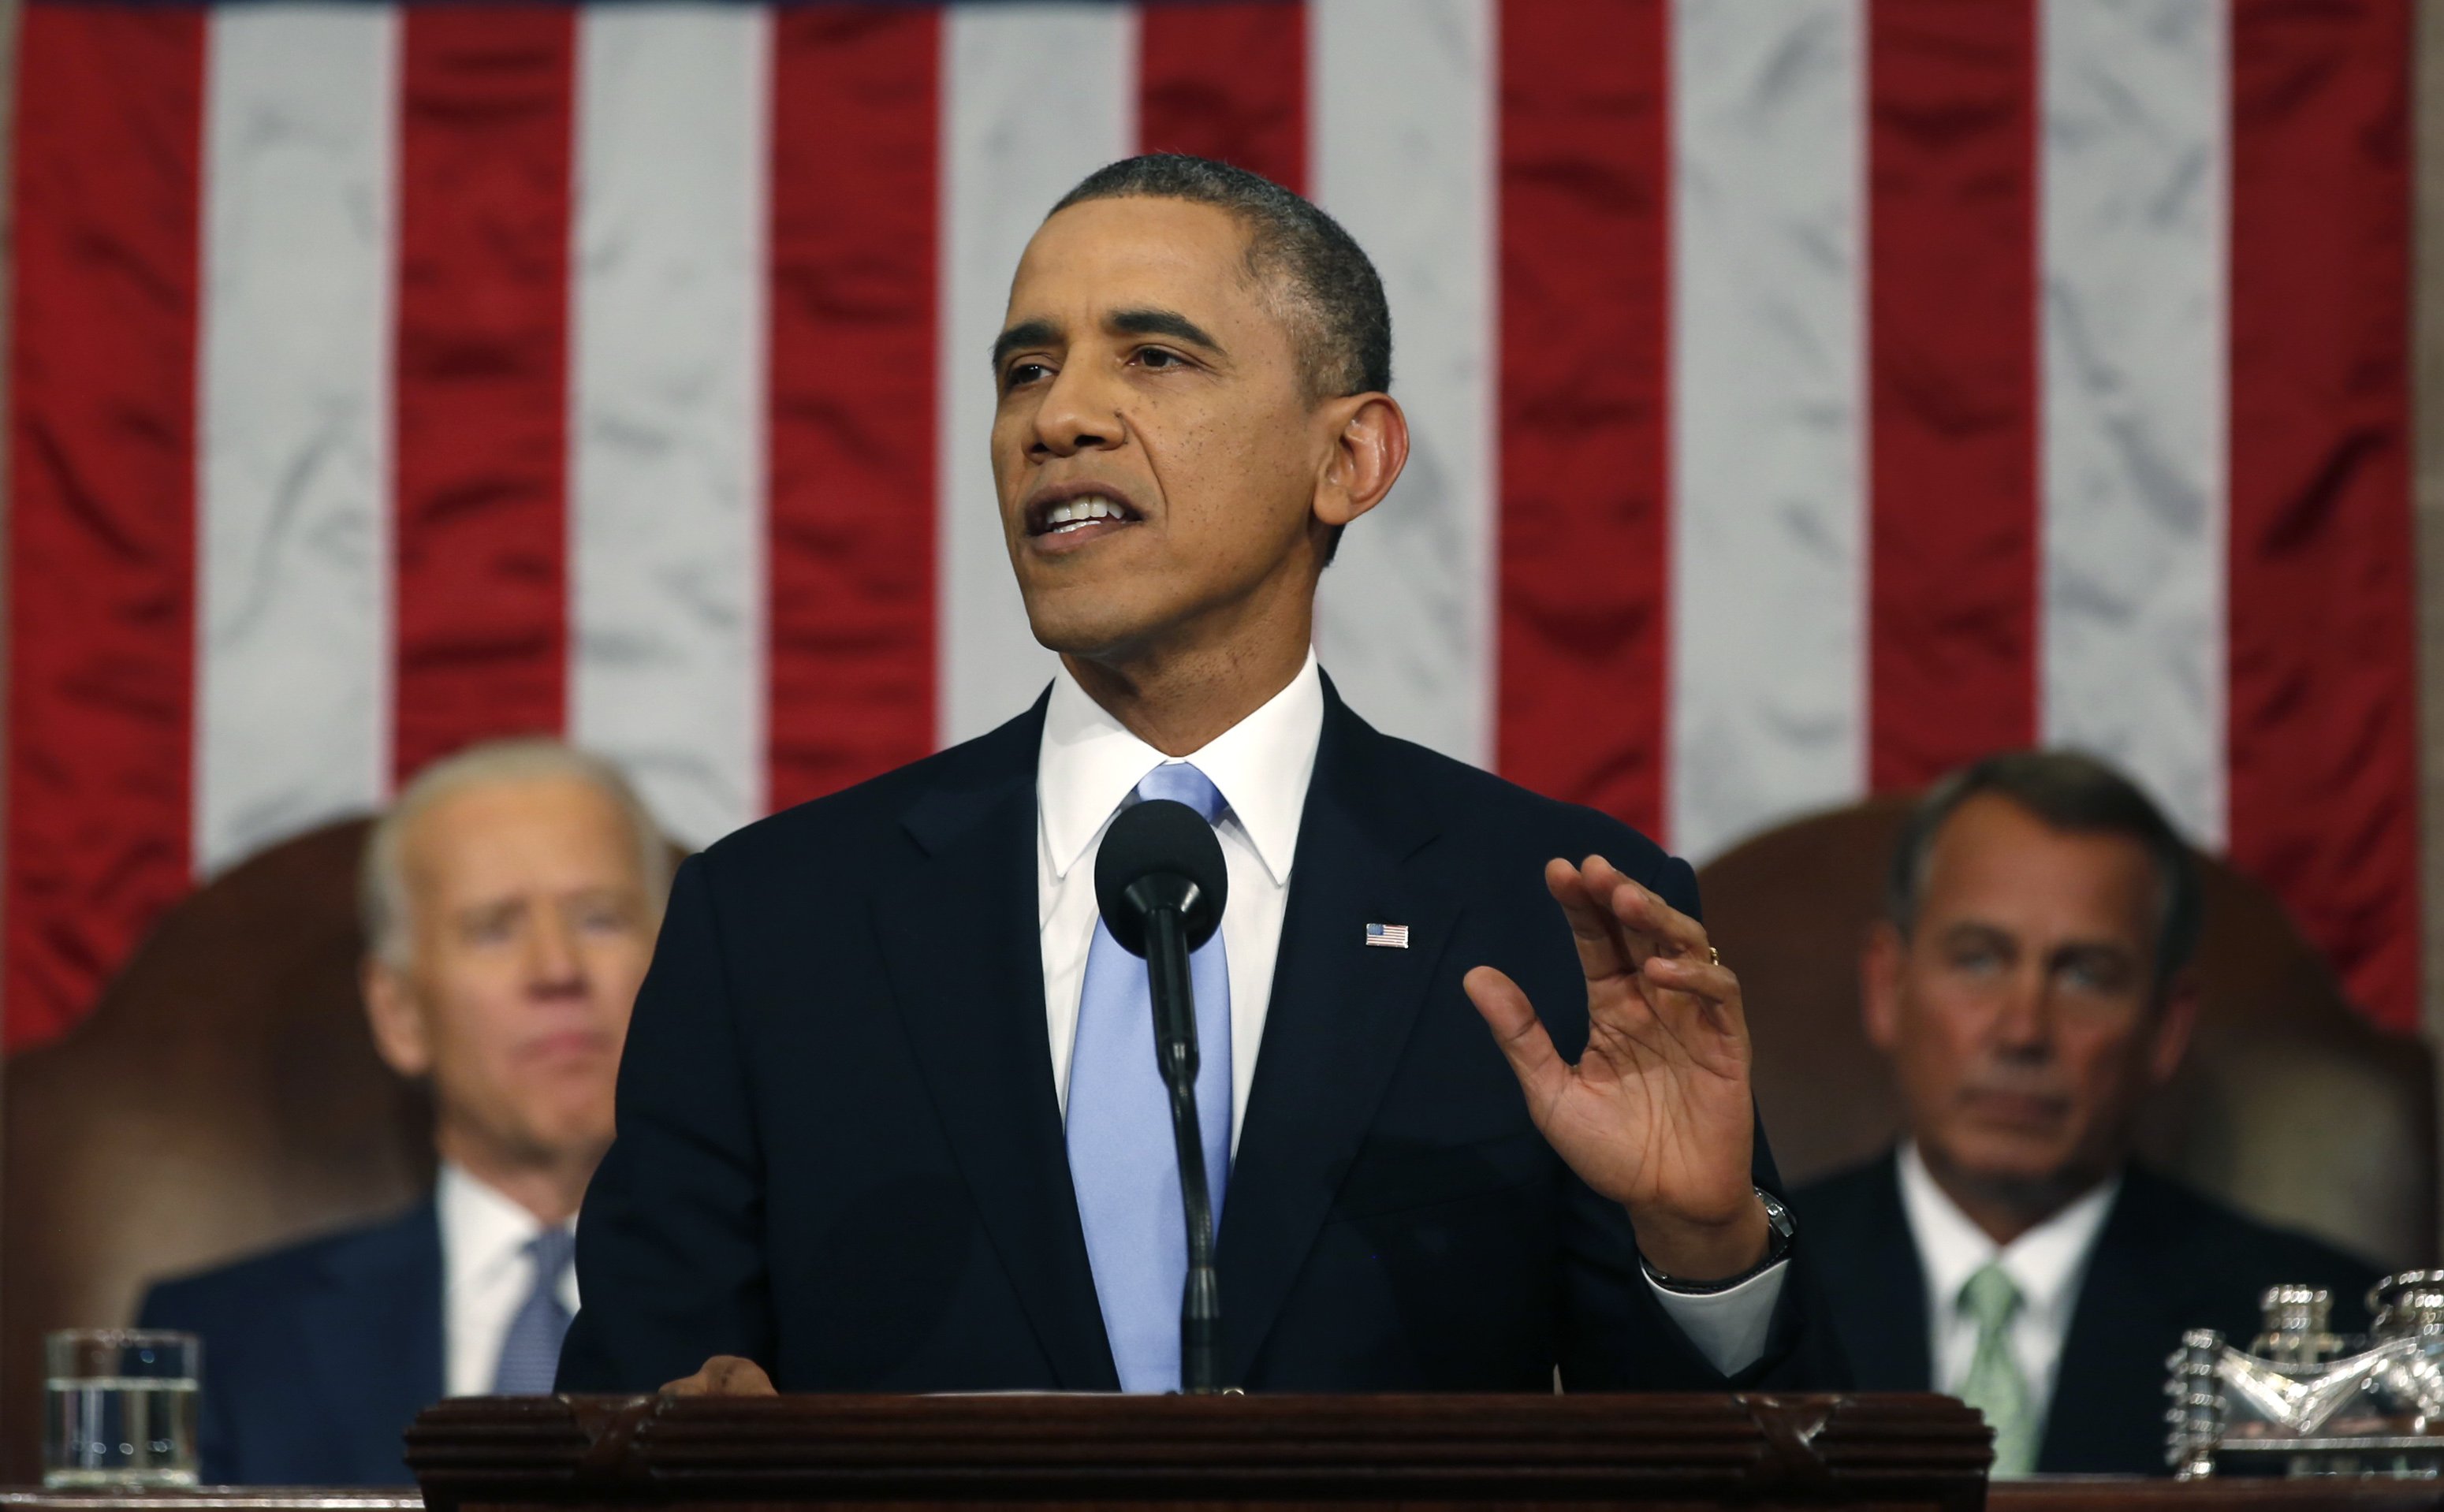 U.S. President Barack Obama delivers his State of the Union speech on Capitol Hill in Washington